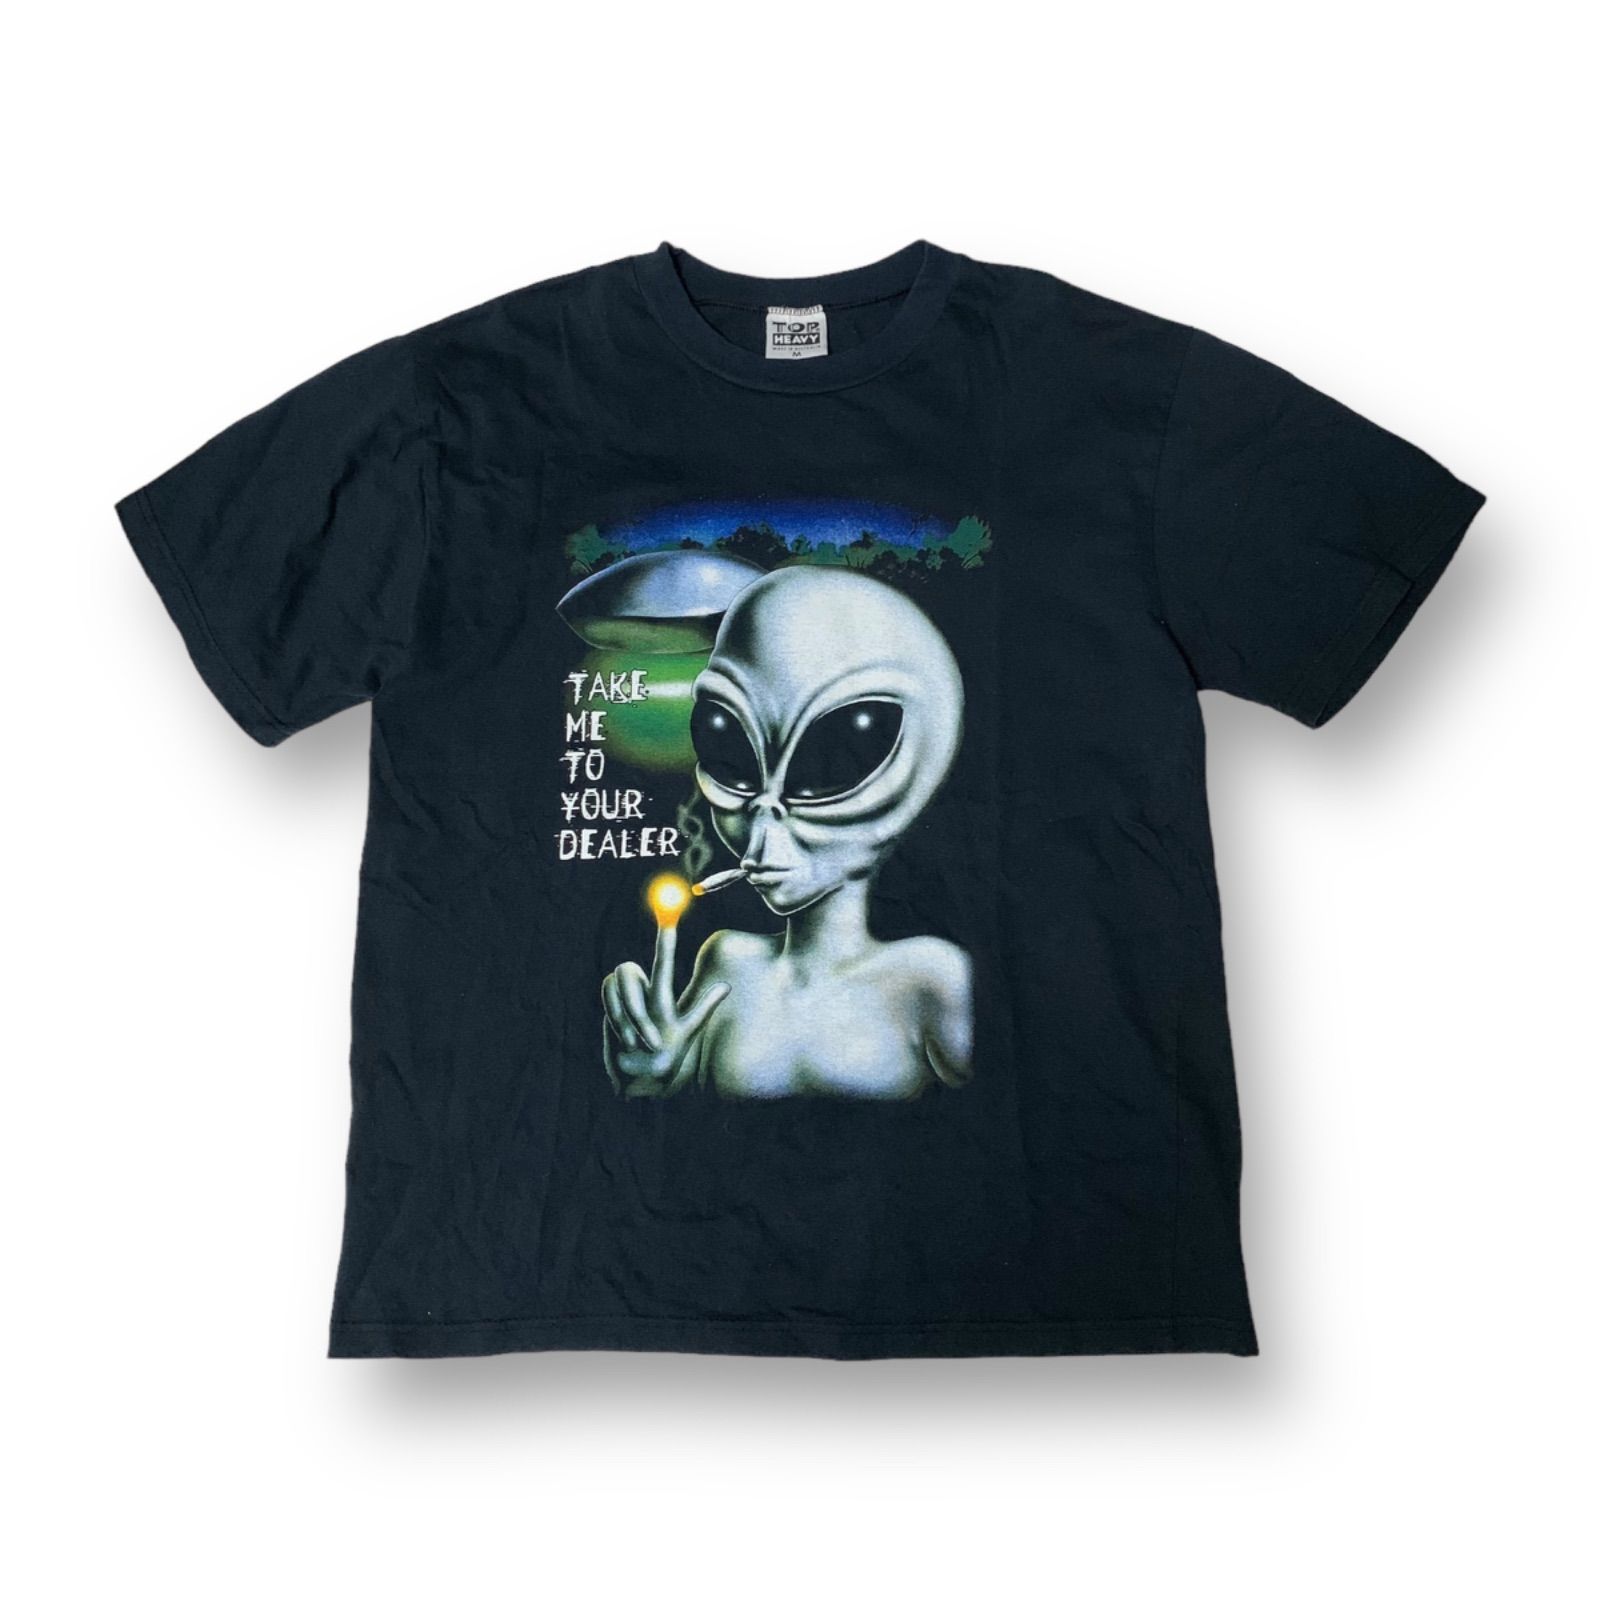 90s S/S TOP HEAVY “TAKE ME TO YOUR DEALER” Graphic T-Shirt トップ 